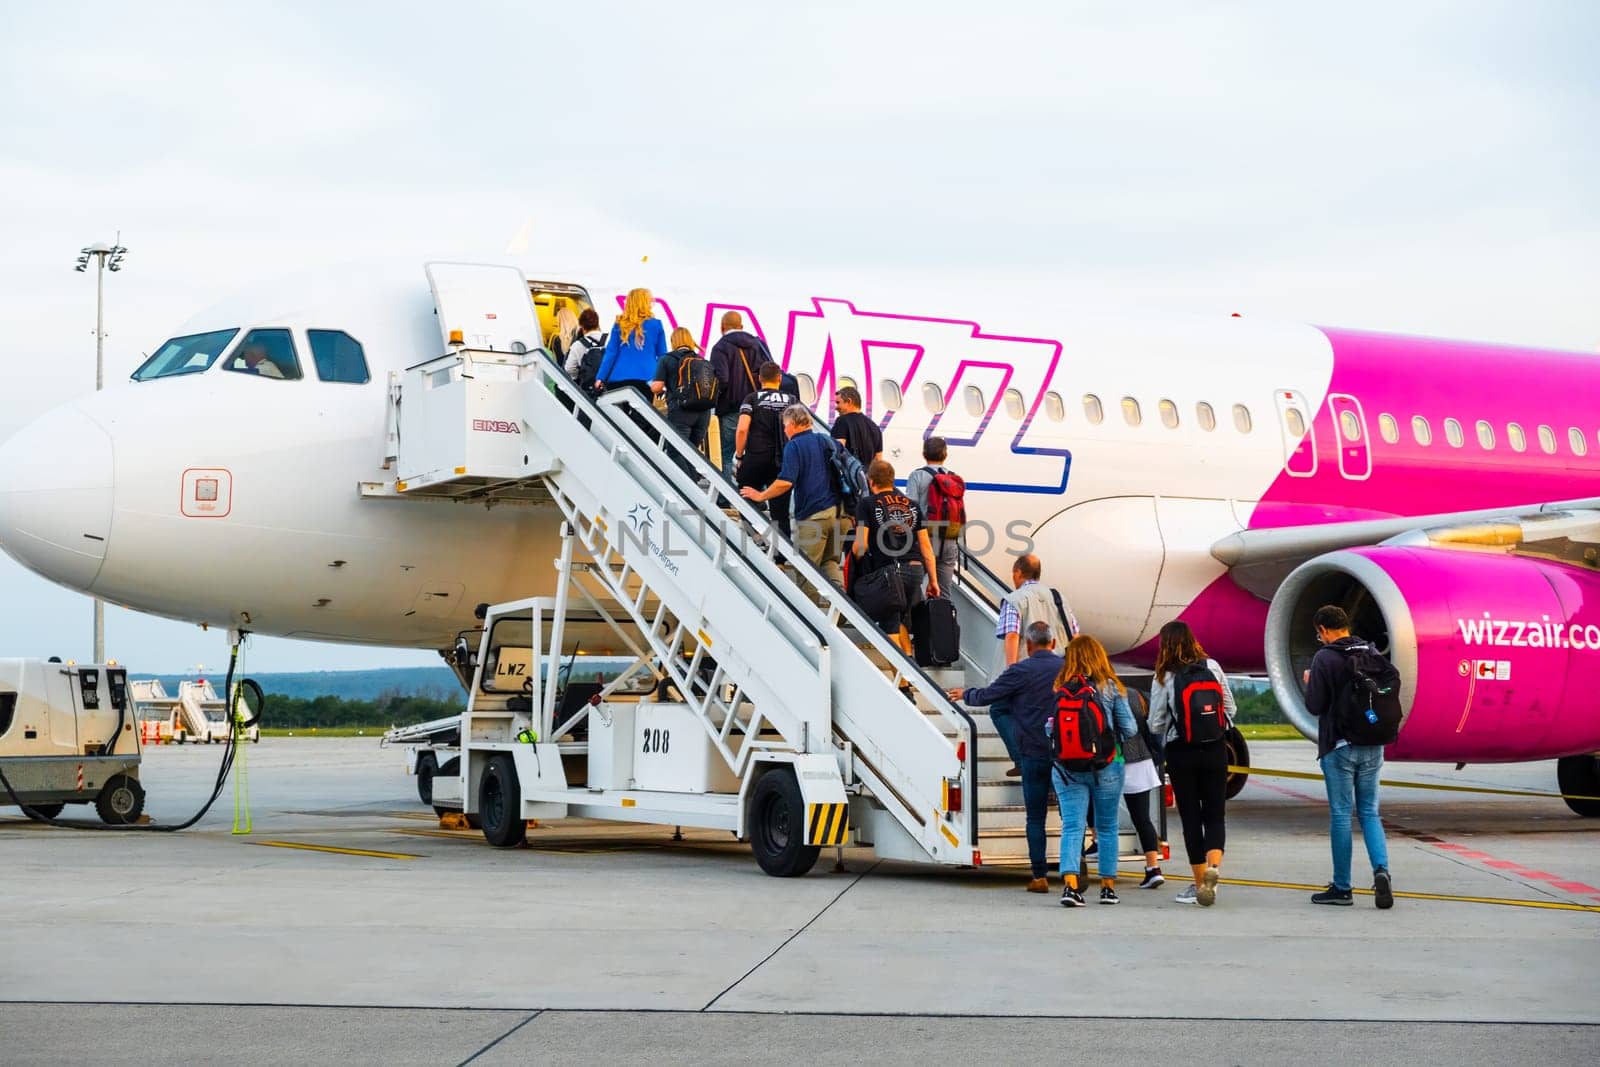 People boarding into the Wizzair airplane. by vladimka